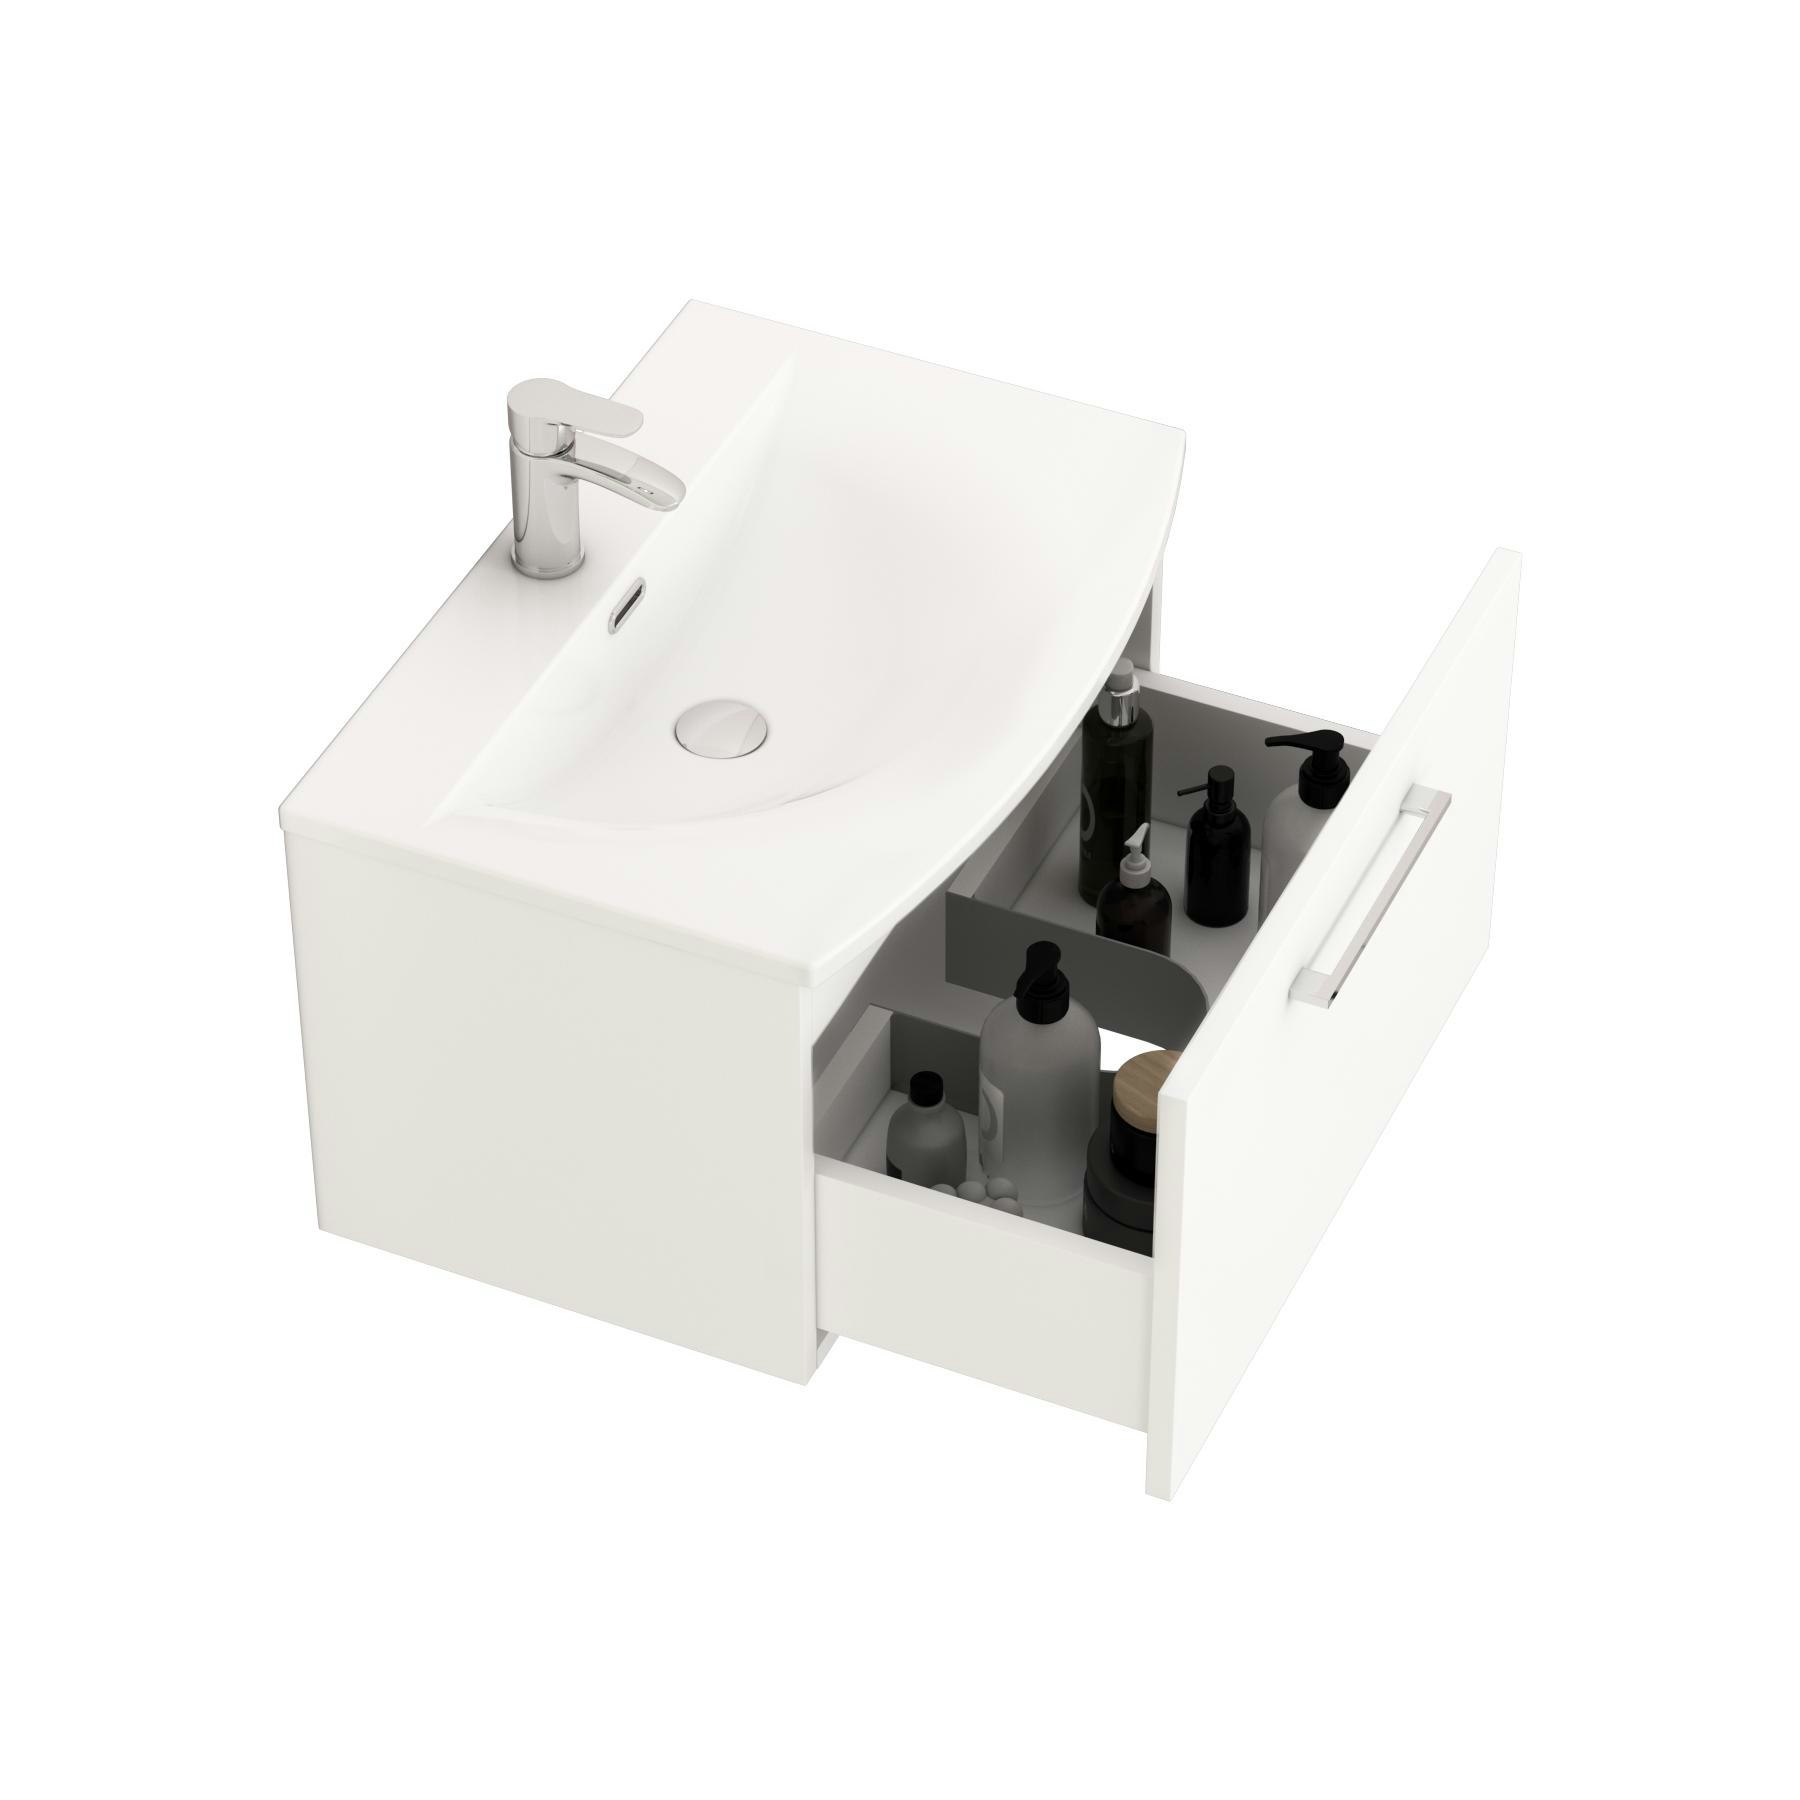 Modena 600mm Satin White Wall Hung Vanity Unit 1 Drawer Curved Basin